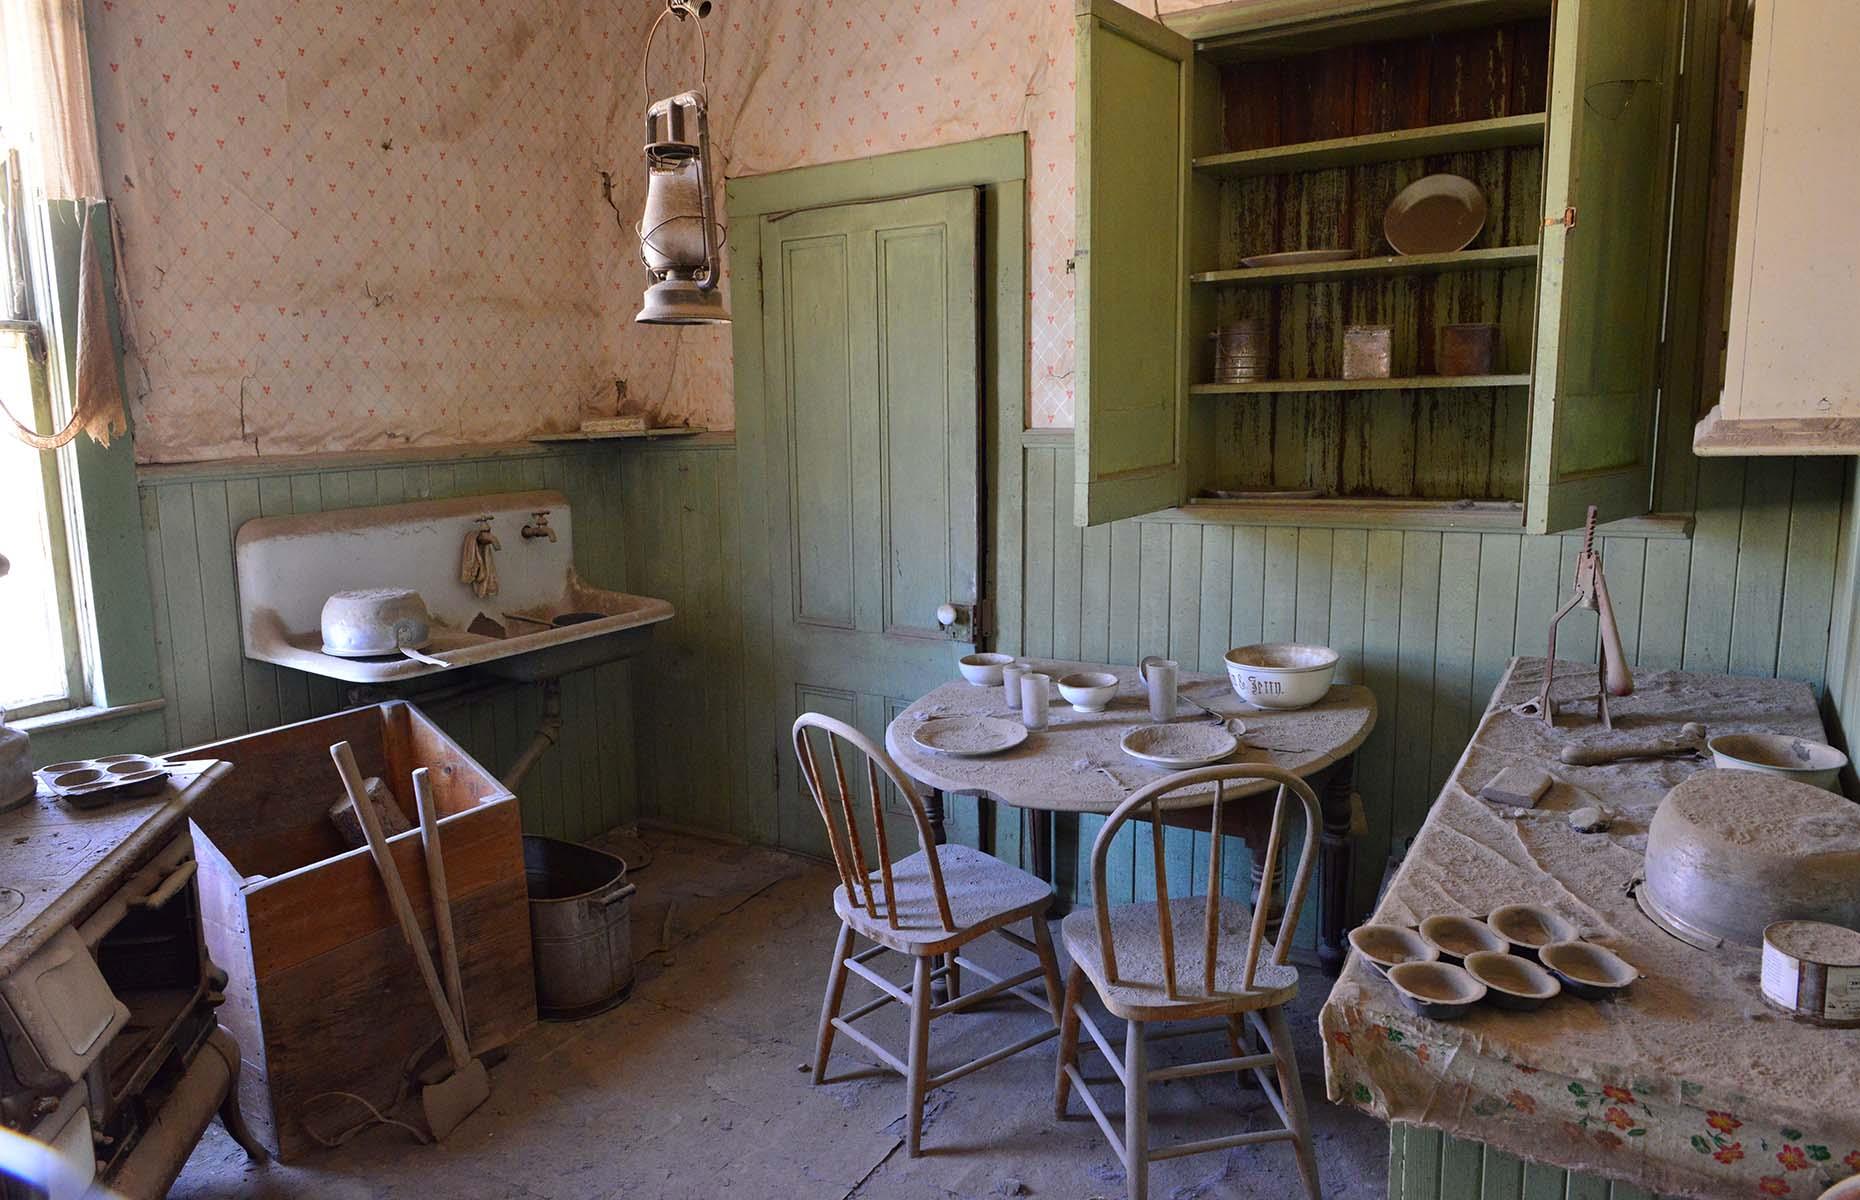 Slide 21 of 46: Over time, the mines became too expensive to run and in 1932 a huge fire burned 90% of the town to the ground. The 200 buildings that remain are now preserved as ruins – tables are still laid with crockery and in the school books lie scattered on desks.